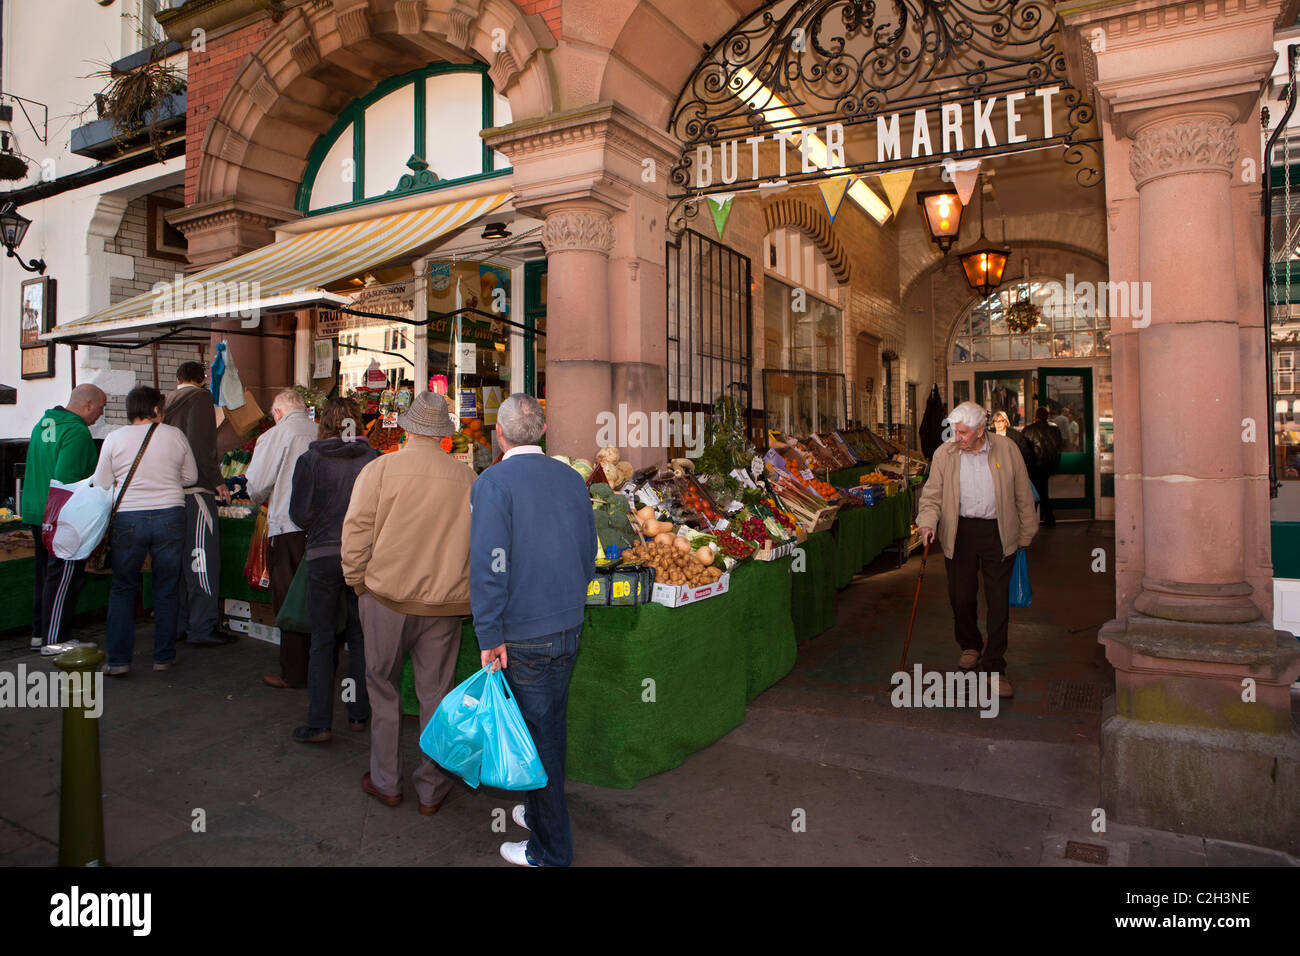 UK, England, Staffordshire, Leek, customers queueing at greengrocers shop at entrance to Butter Market, Stock Photo